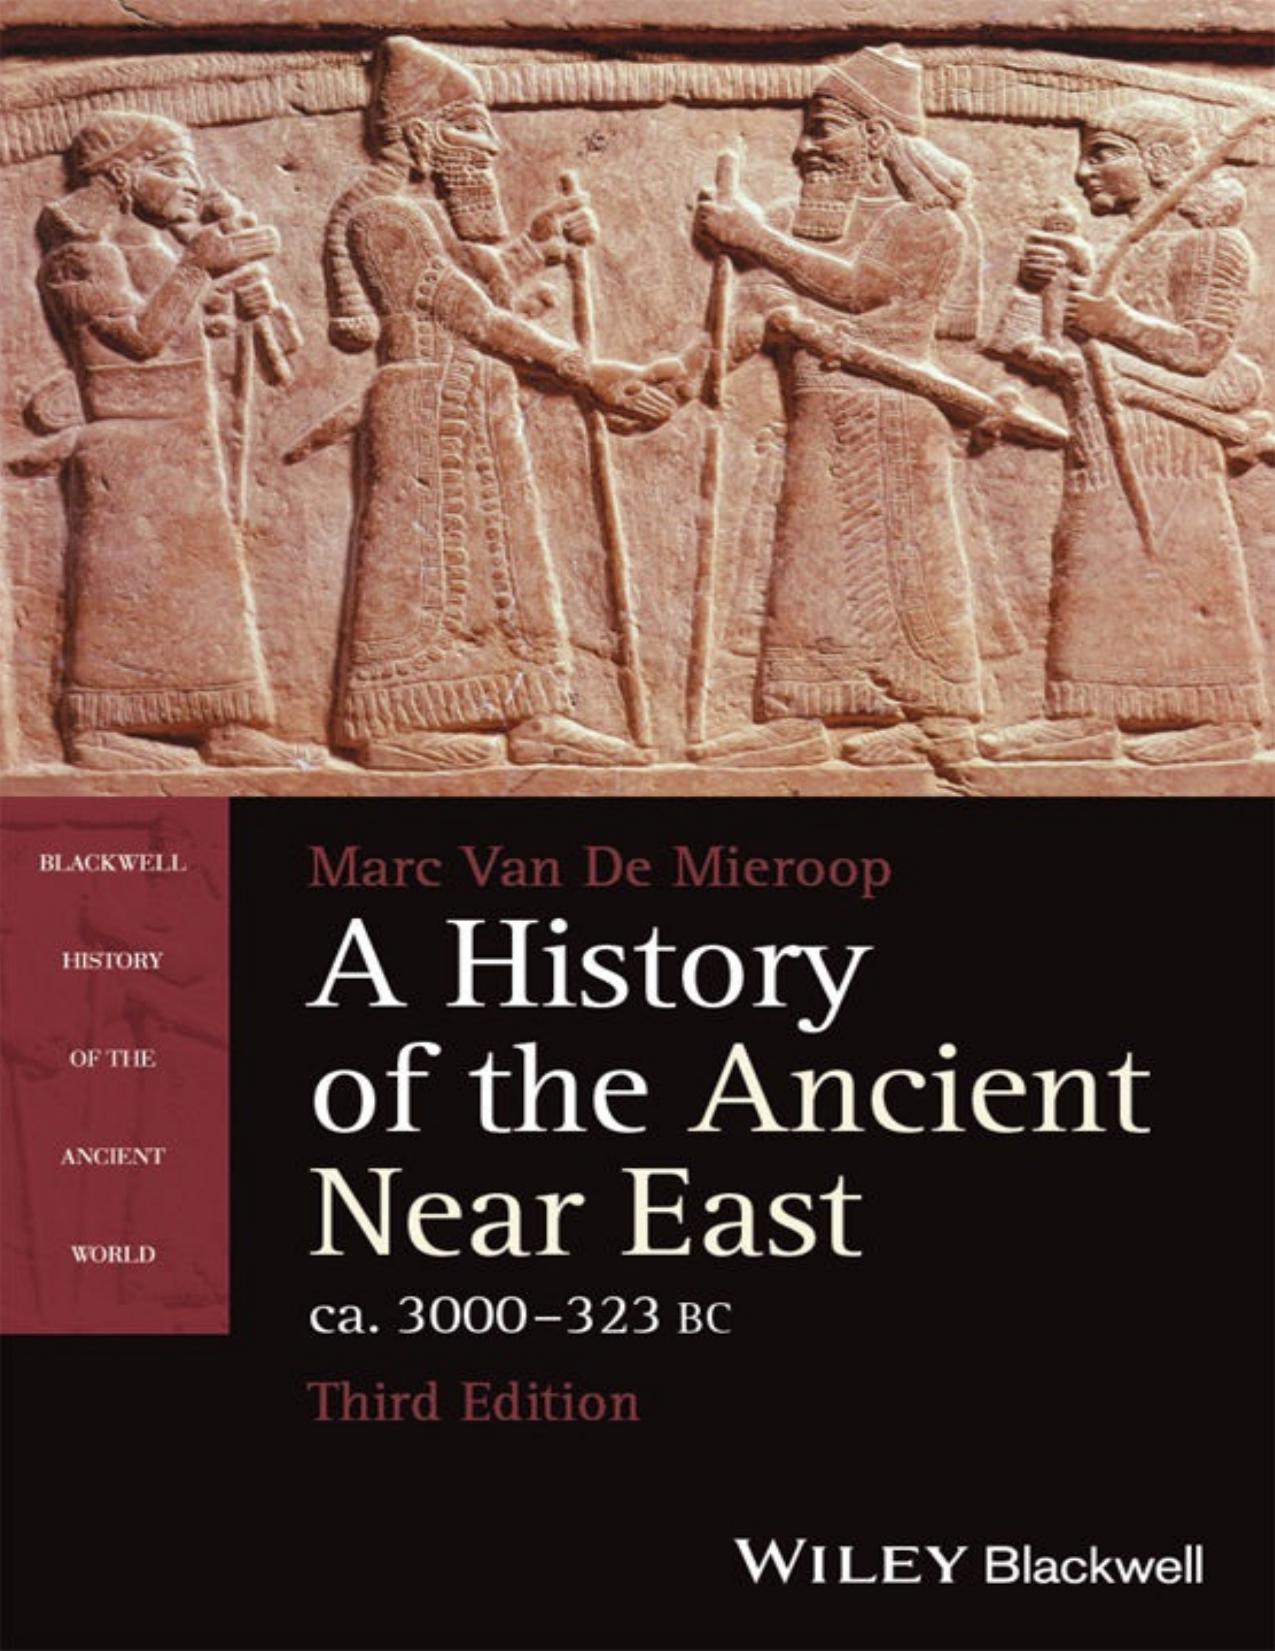 A History of the Ancient Near East, ca. 3000-323 BC - PDFDrive.com